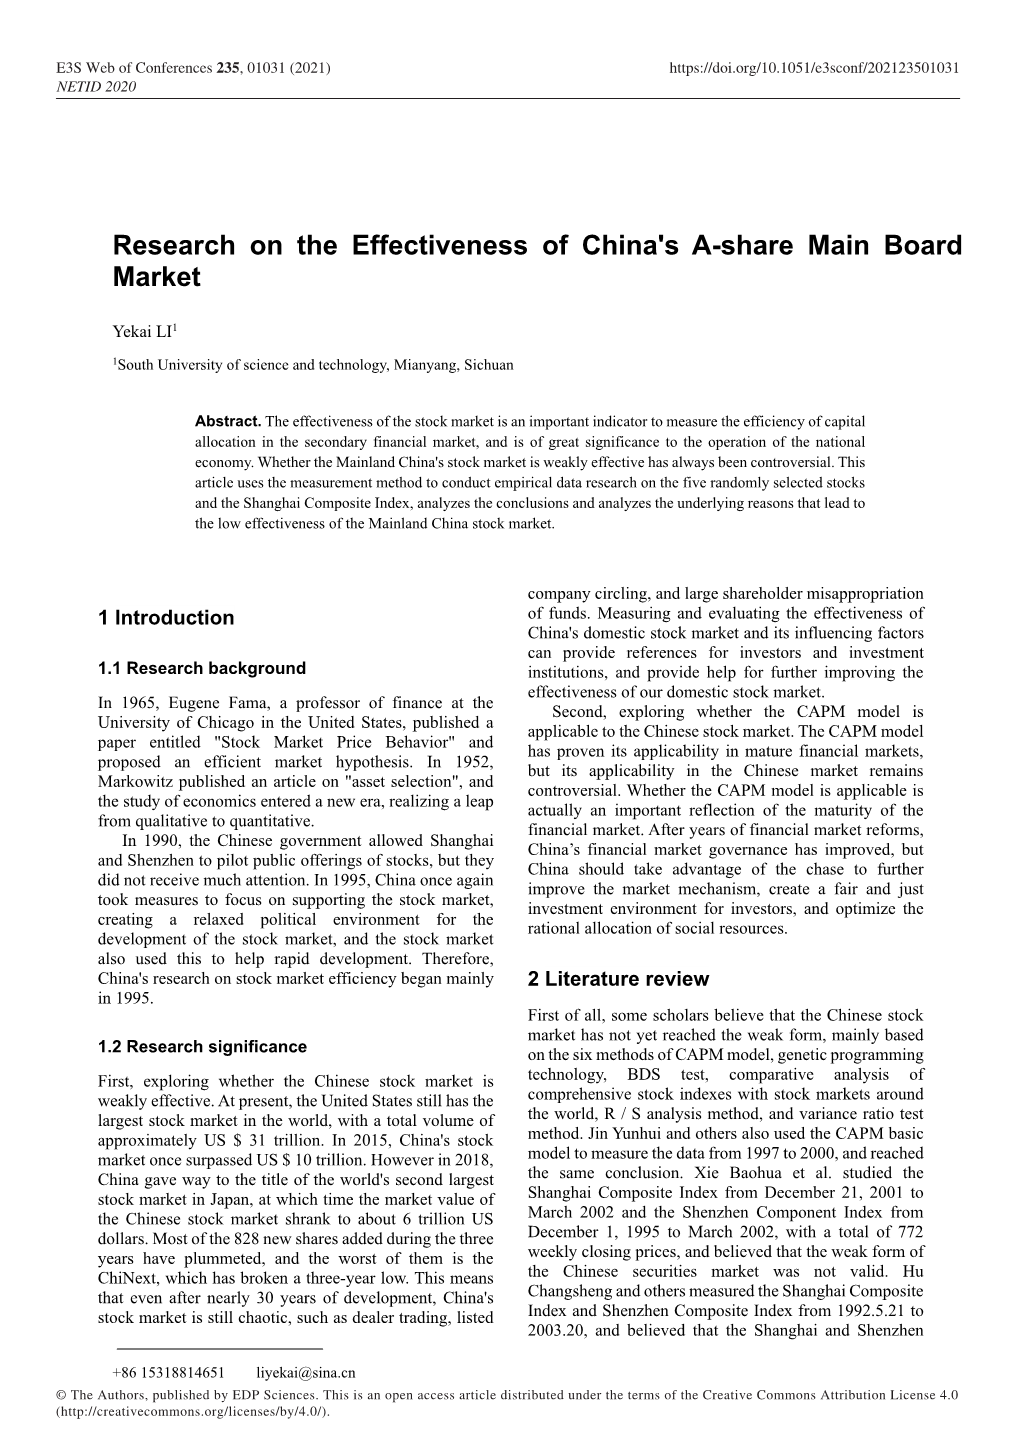 Research on the Effectiveness of China's A-Share Main Board Market